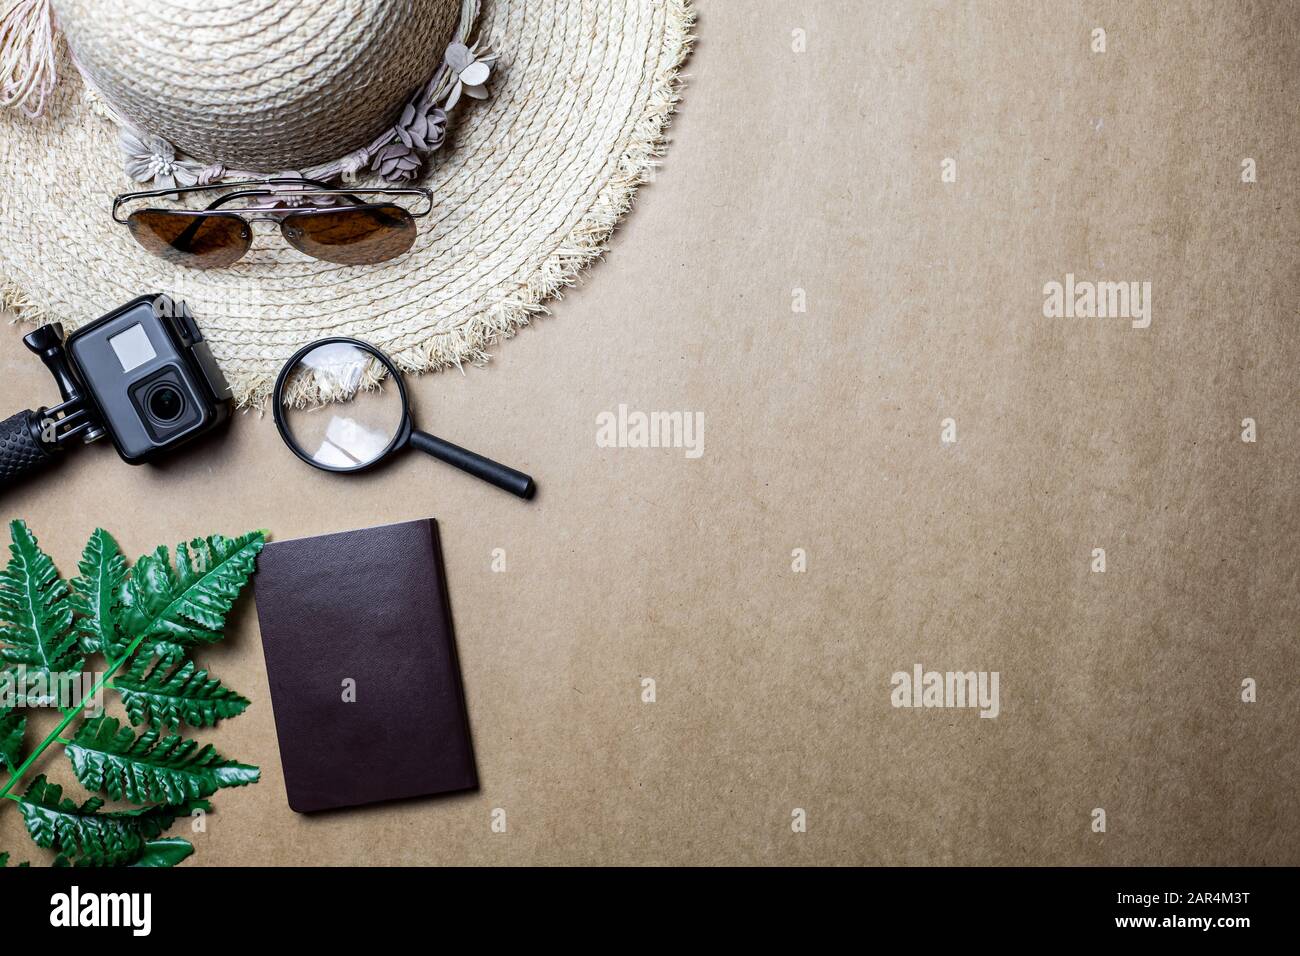 Top view of accessories used for leisure travelers on a brown background. Travel accessories and copy space. Concept of top view travel accessories. Stock Photo